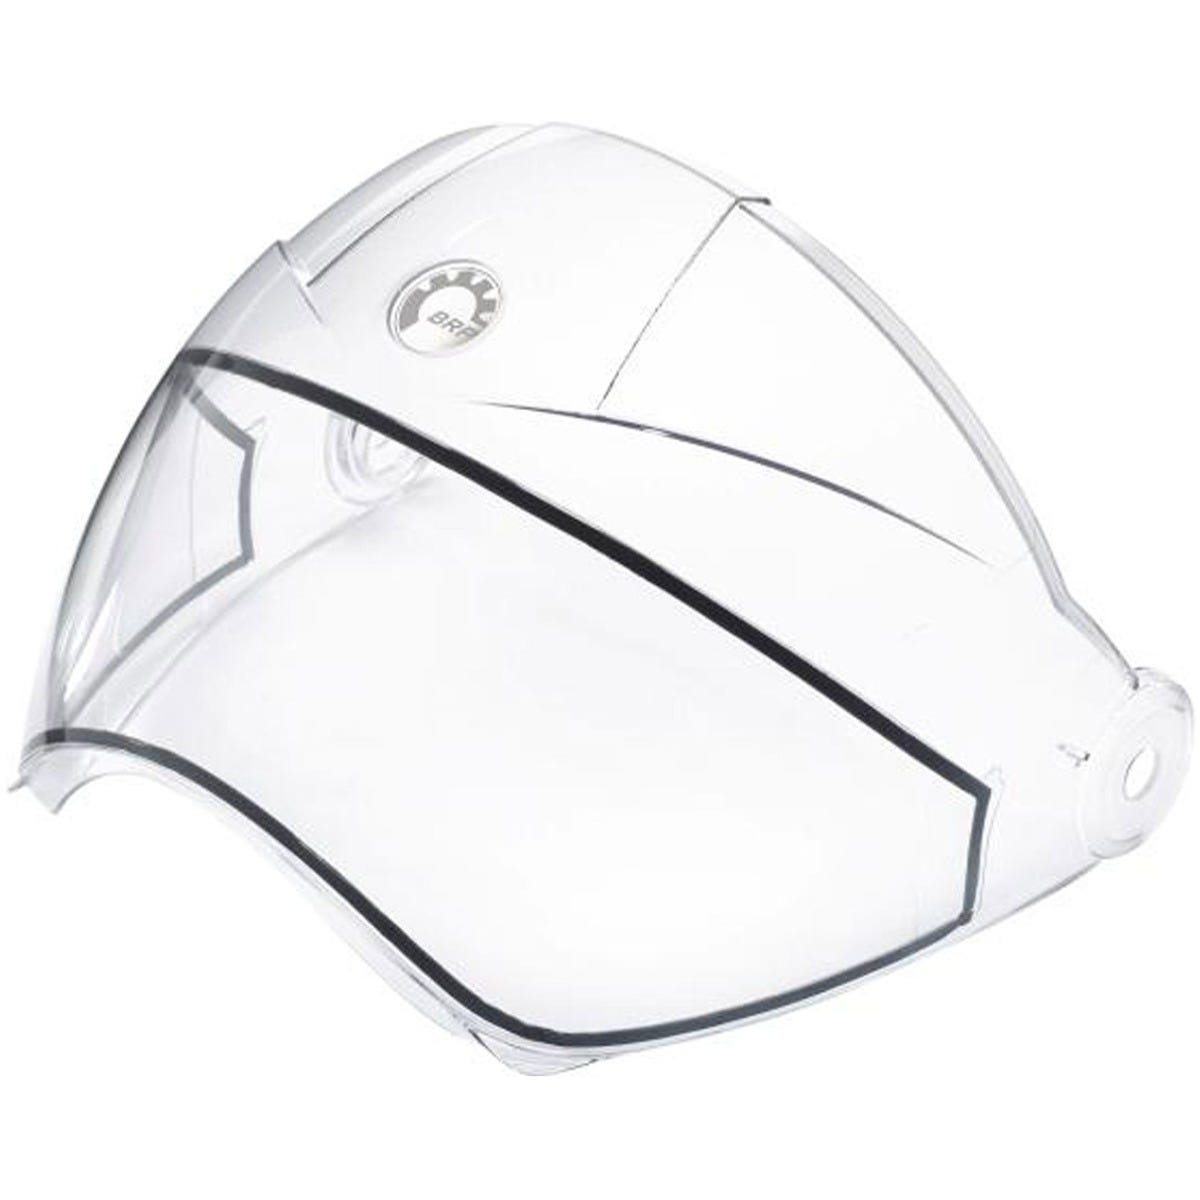 BV2S Helmet Replacement Visor (2021) - The Parts Lodge